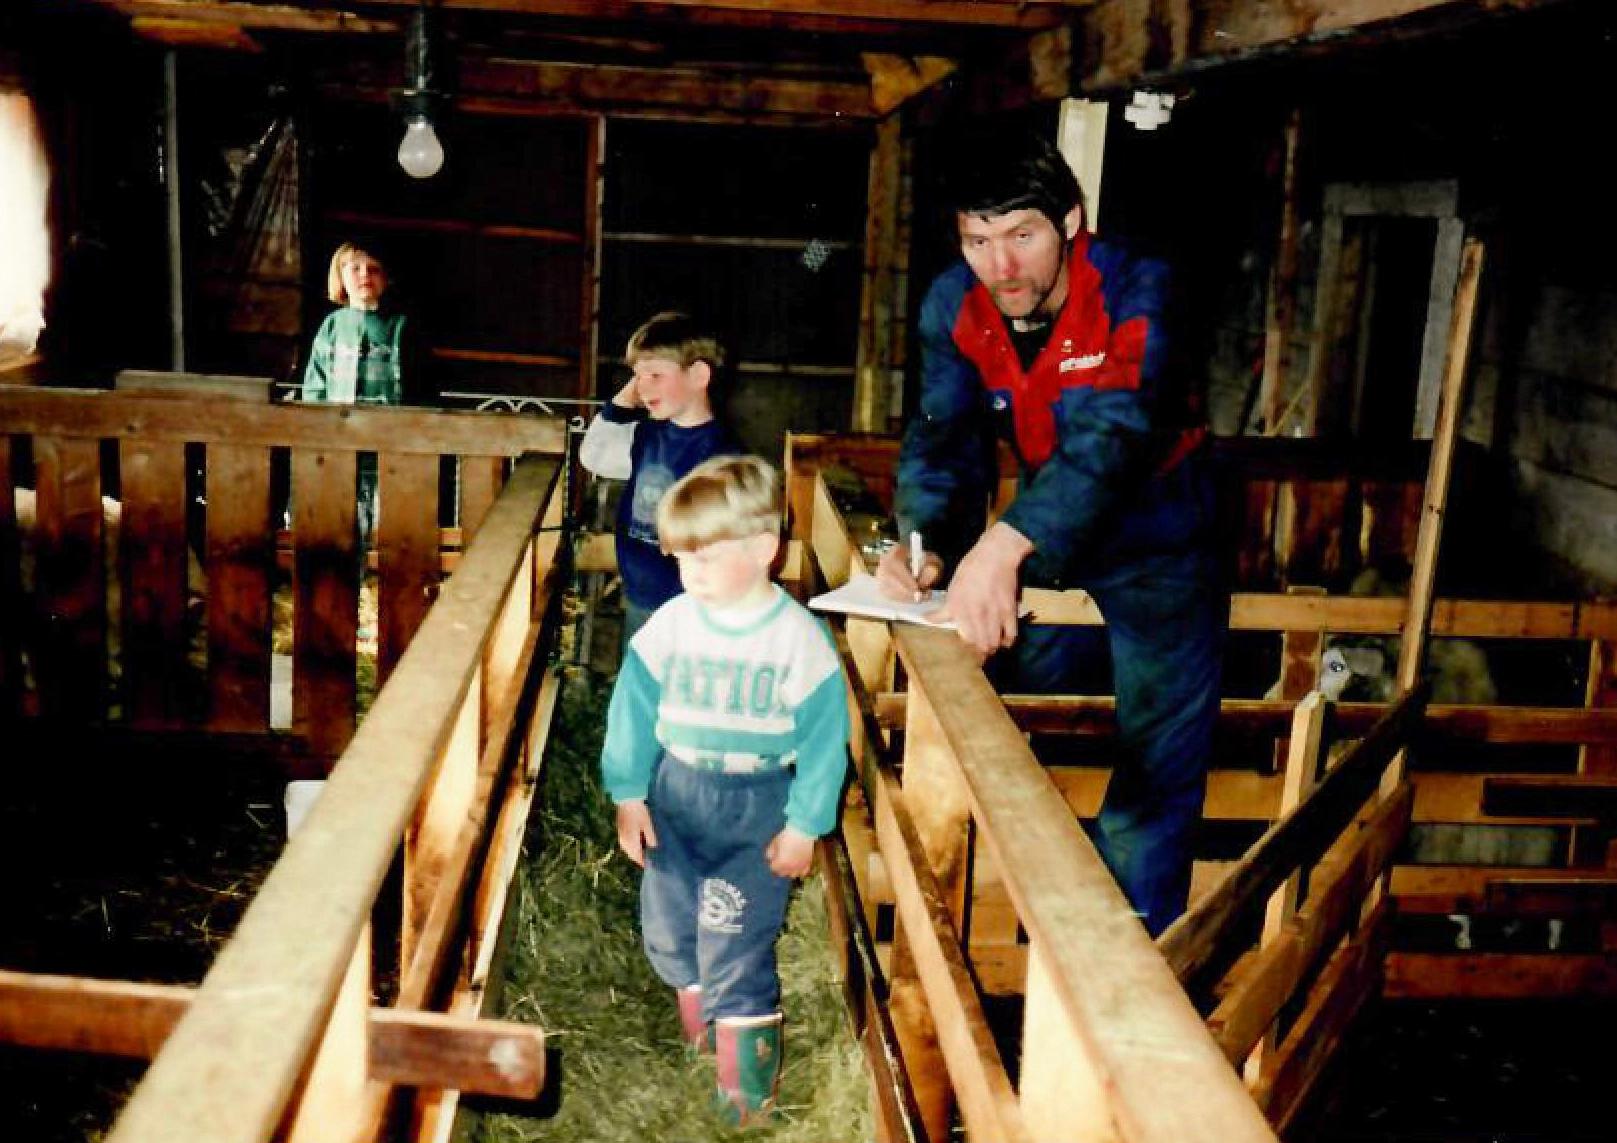 Inside the old barn that was before Lyngen North was built